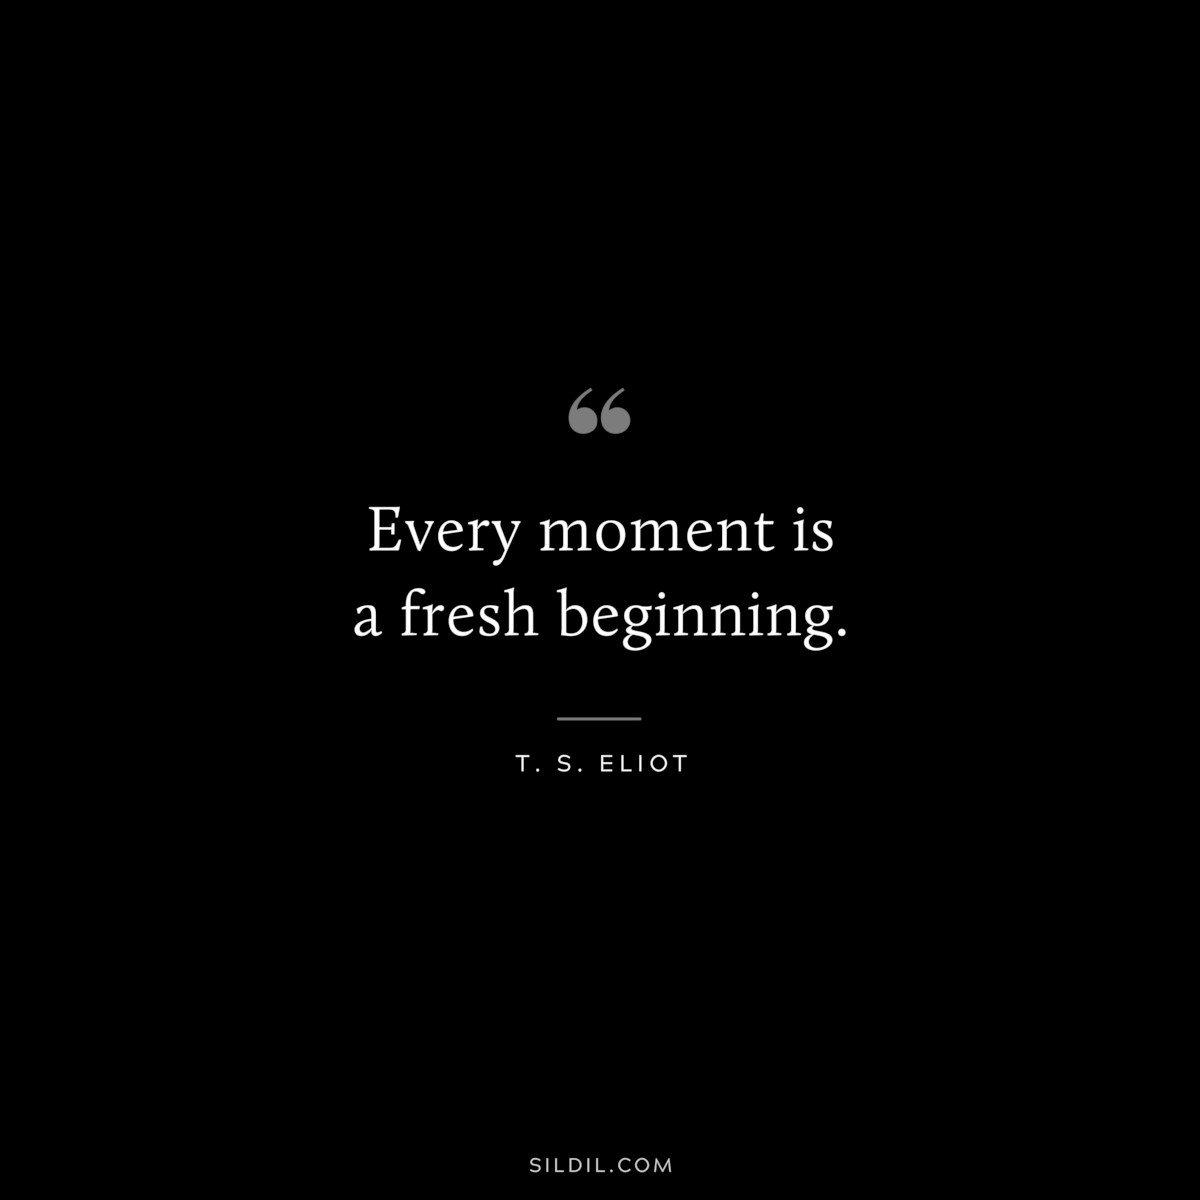 Every moment is a fresh beginning. ― T. S. Eliot